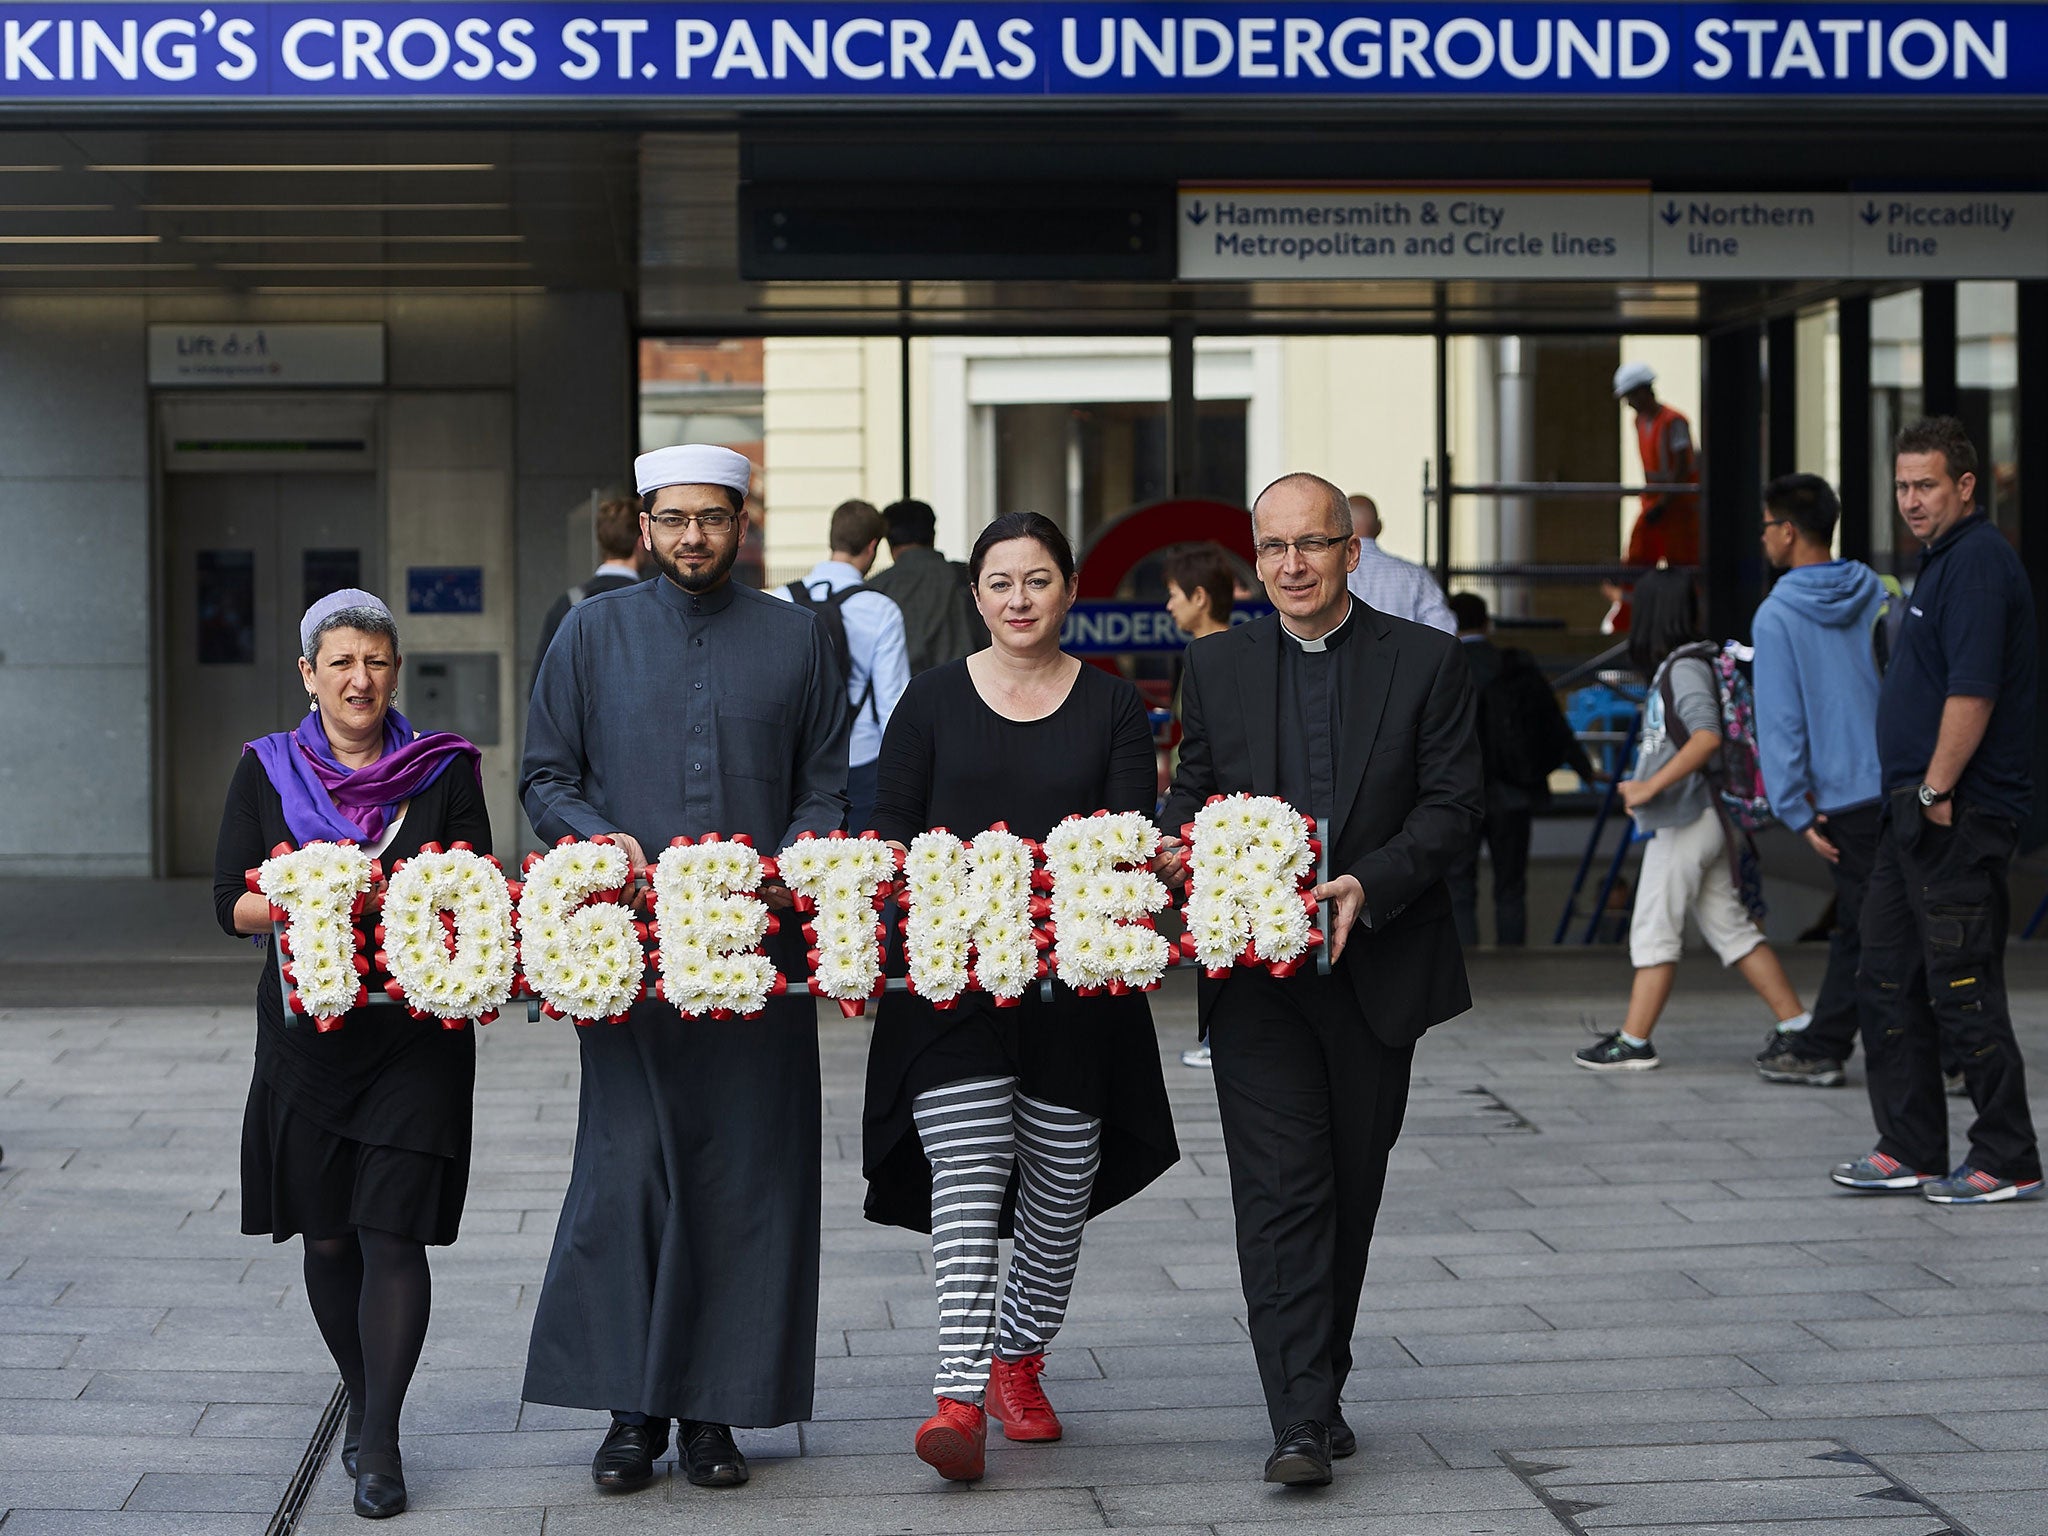 Faith leaders promote religious unity in central London, as Britain prepares to mark 10th anniversary of the 7/7 London bombings in which 52 people were killed